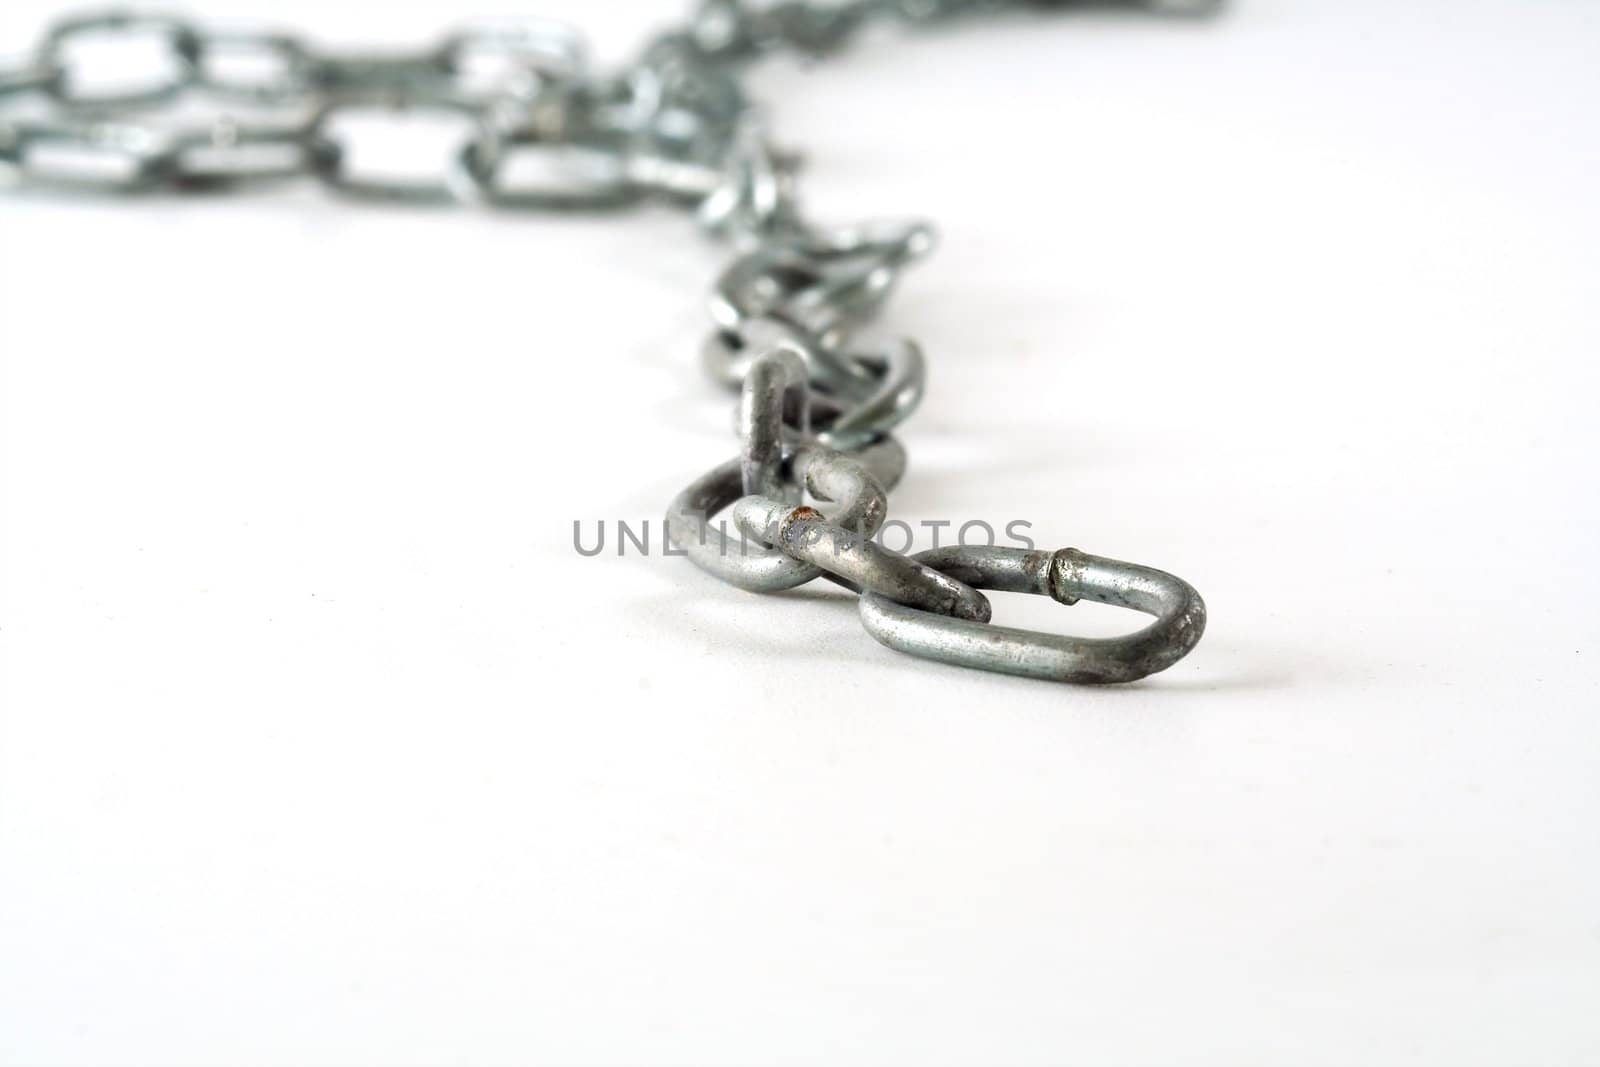 Iron chain on a white background